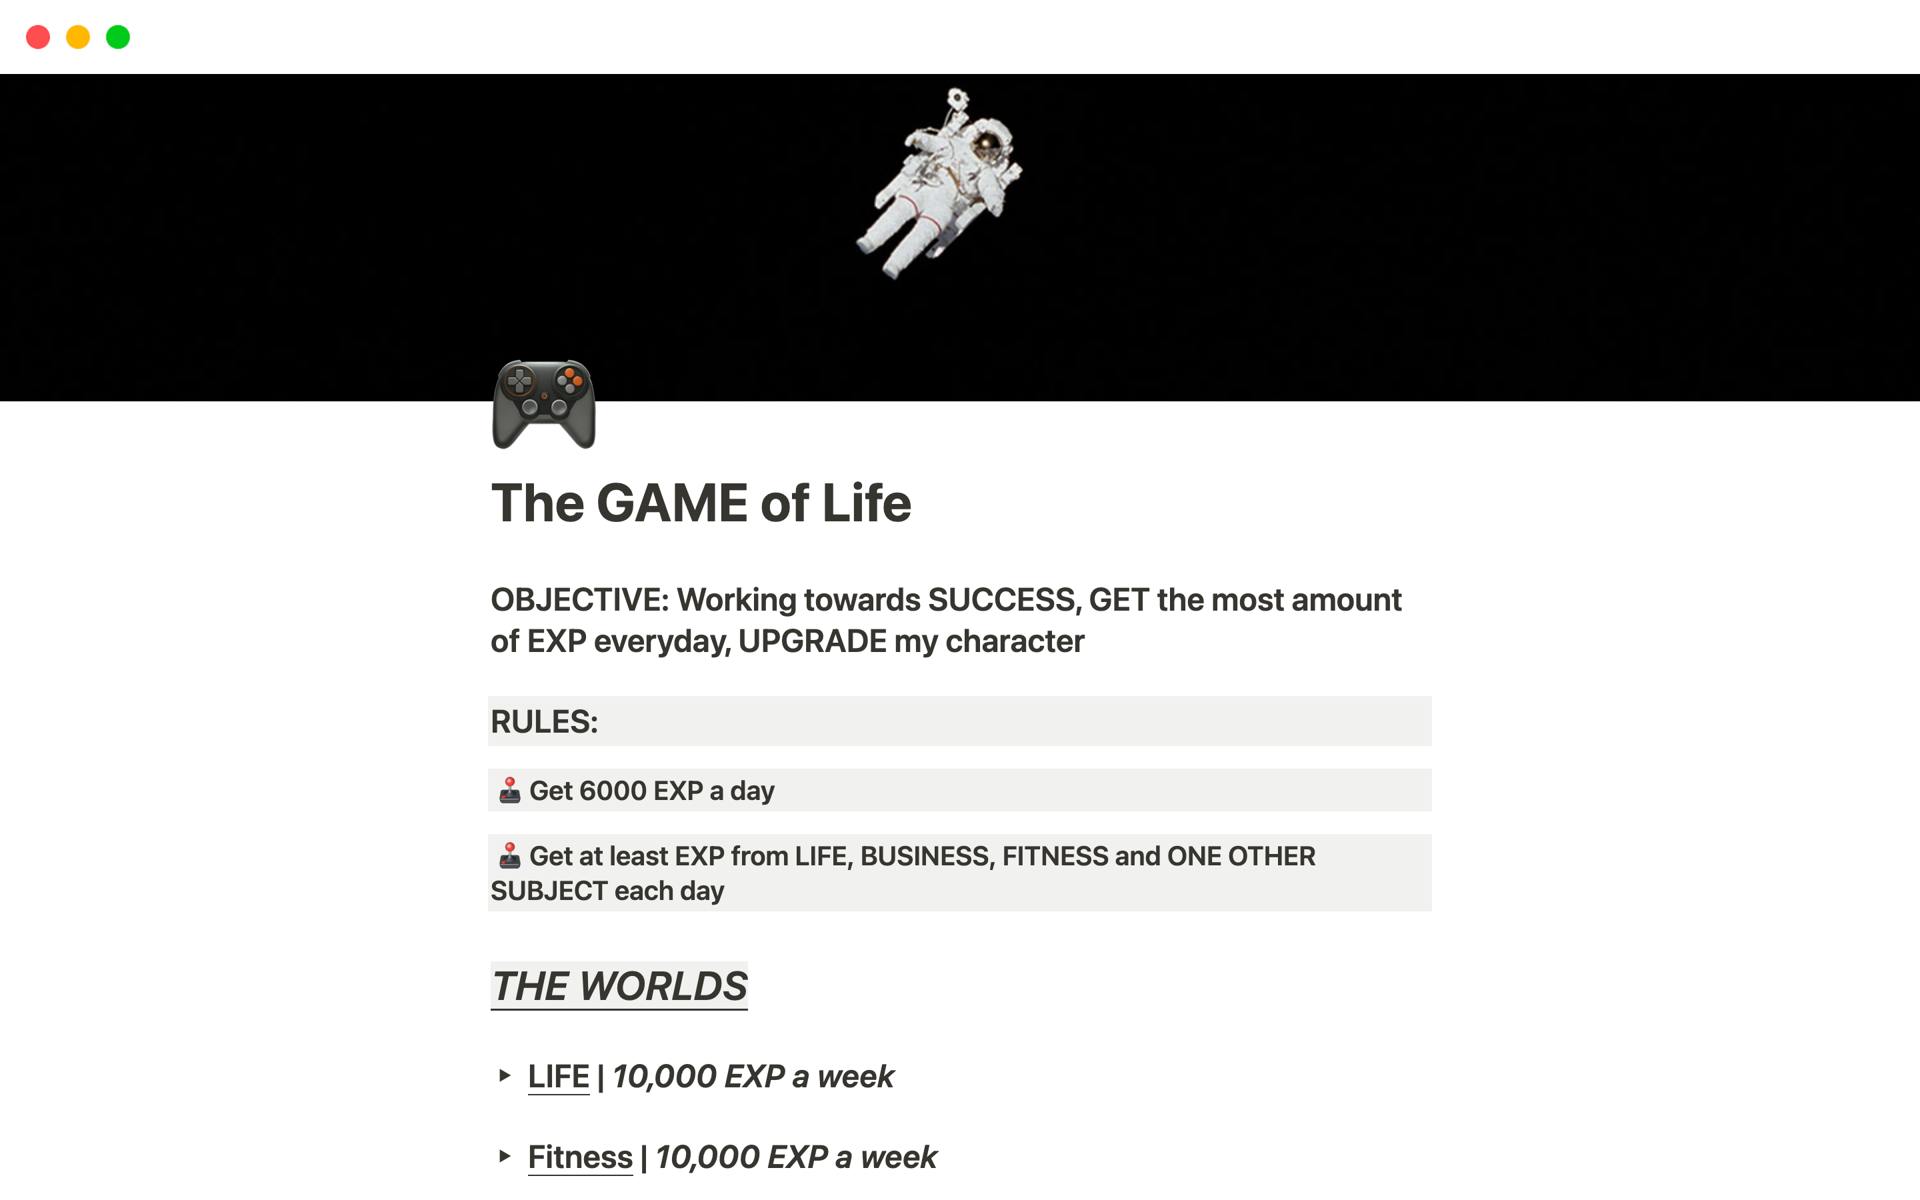 Life is a game. 
The only way to win is to play by the rules or outsmart it.
Gain control.